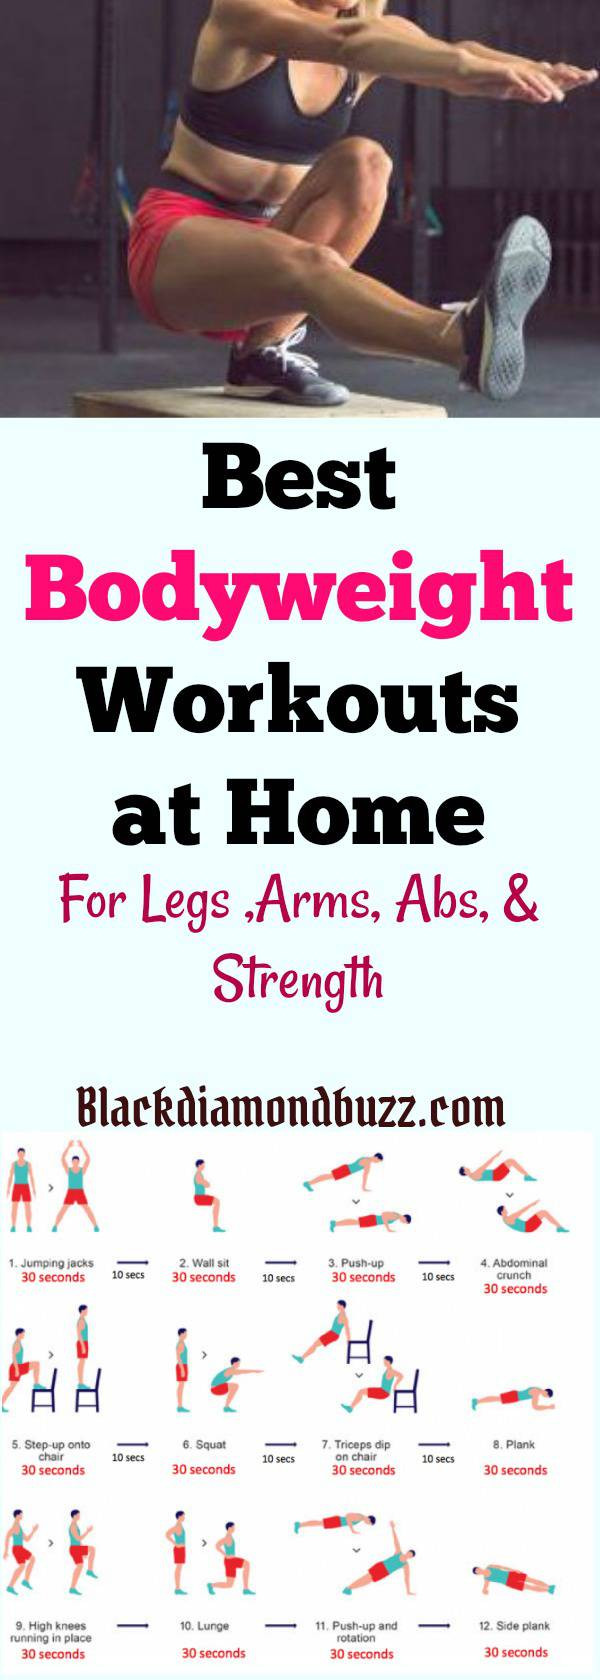 Best Weight Loss Exercises
 7 Best Bodyweight Exercises for Weight Loss at Home For